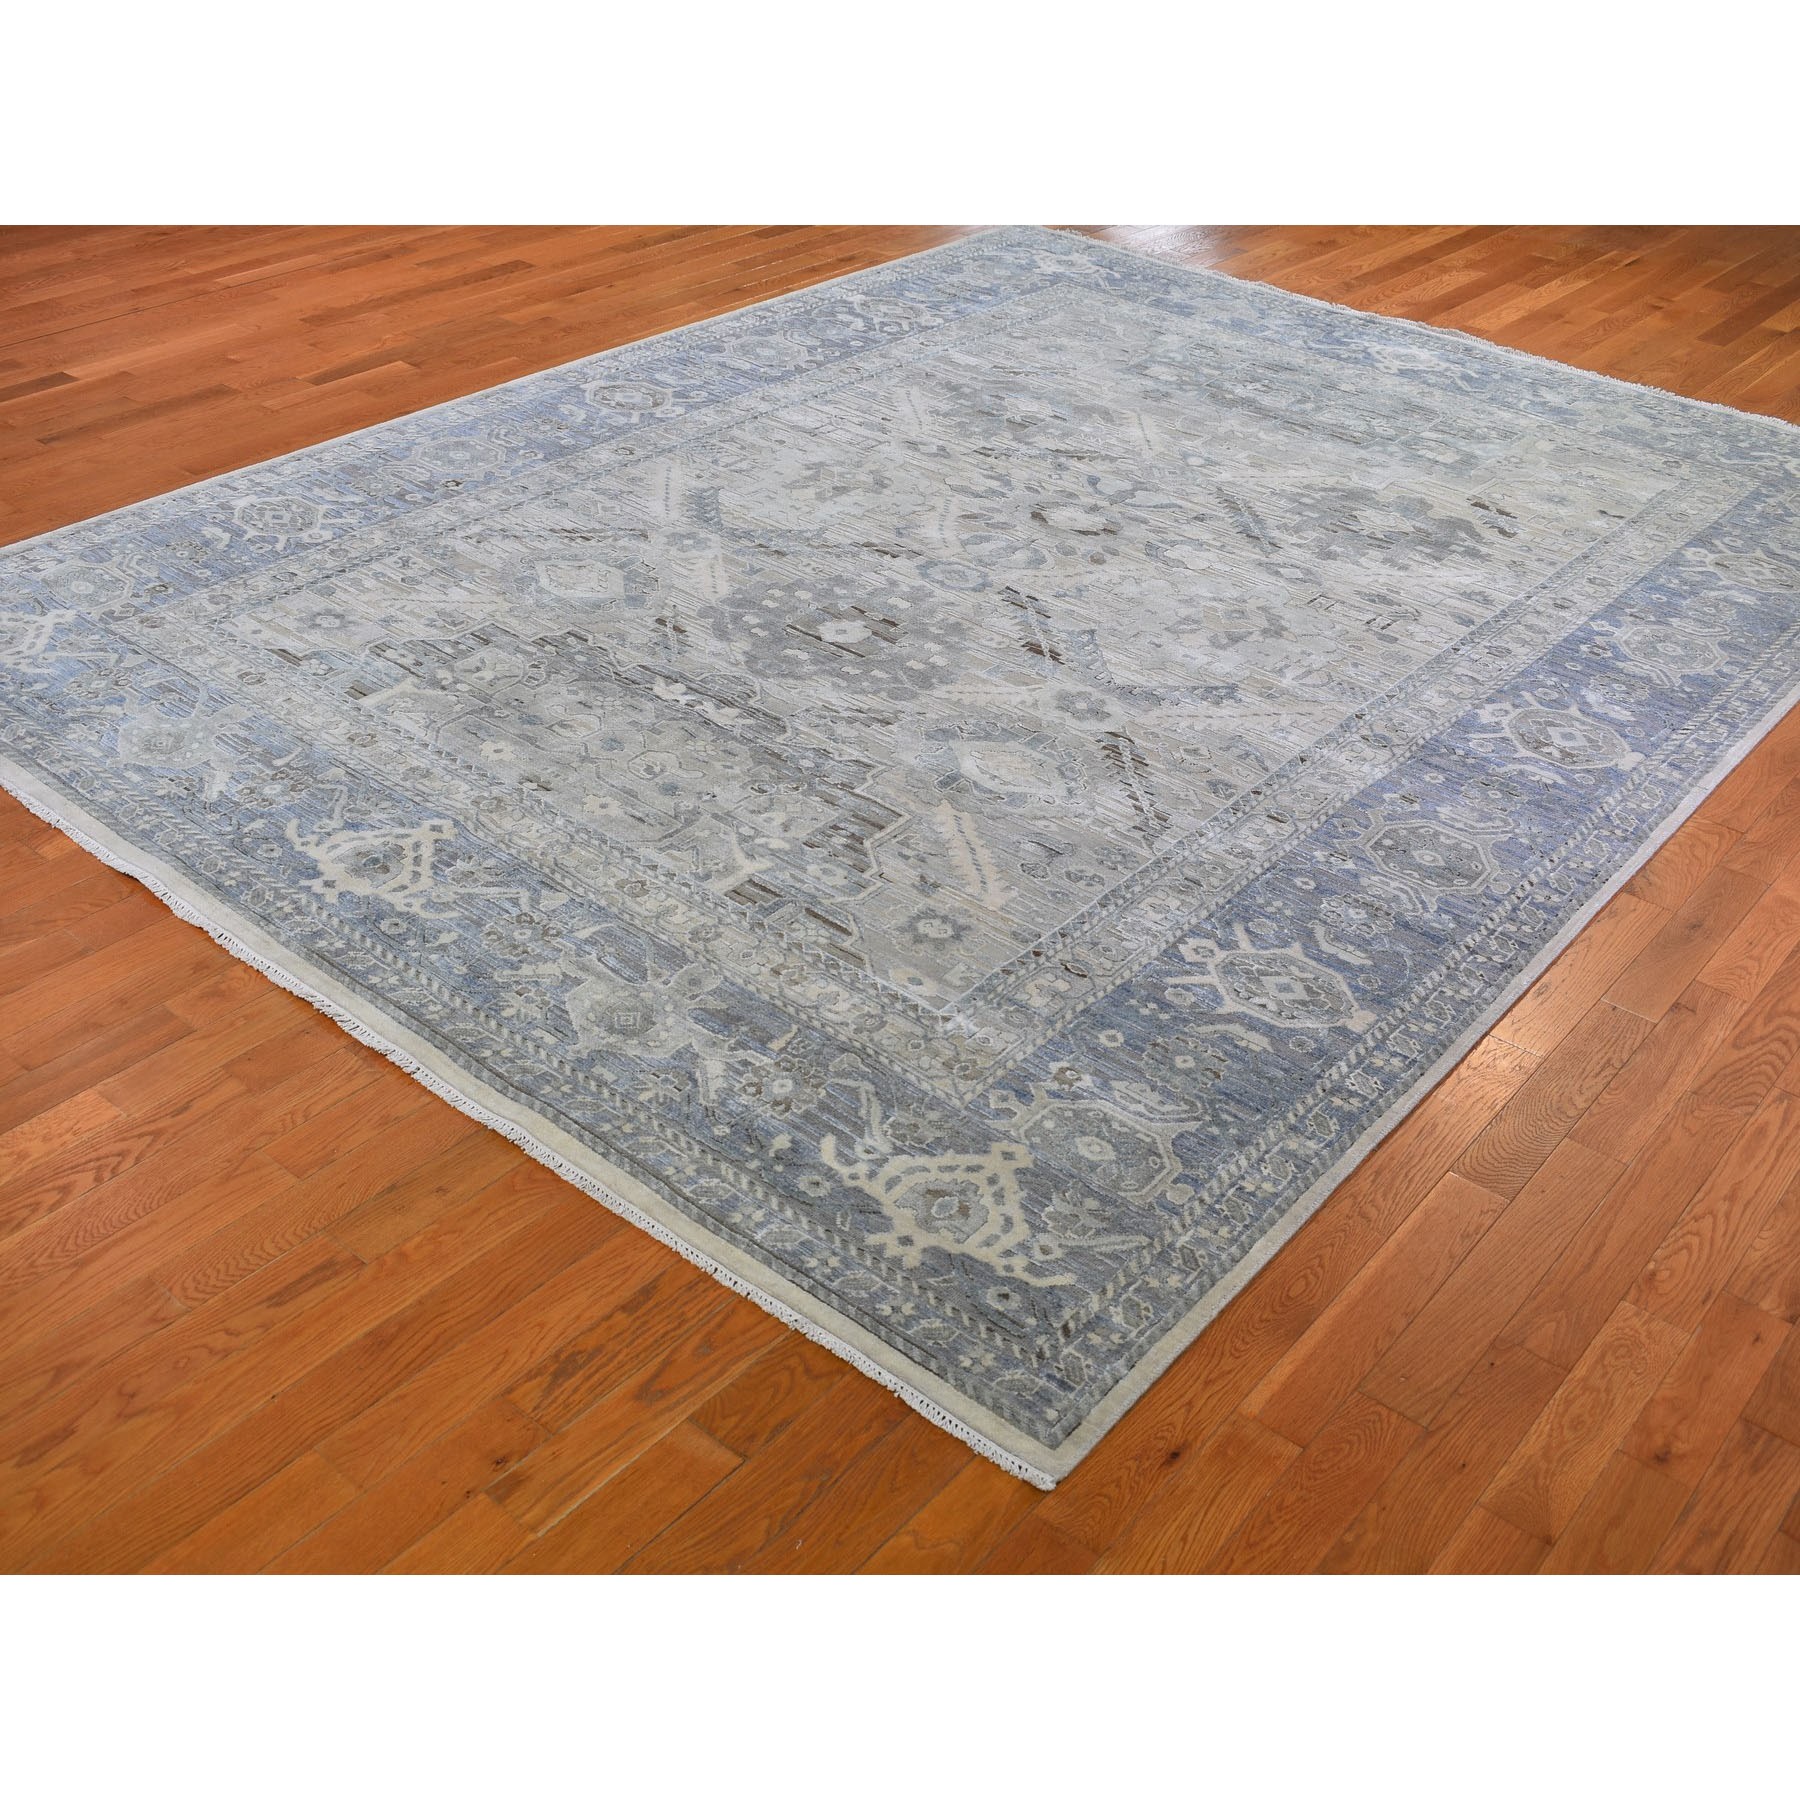 9-1 x12- Hand Knotted Pure Silk And Textured Wool Oushak With Geometric Motif Oriental Rug 